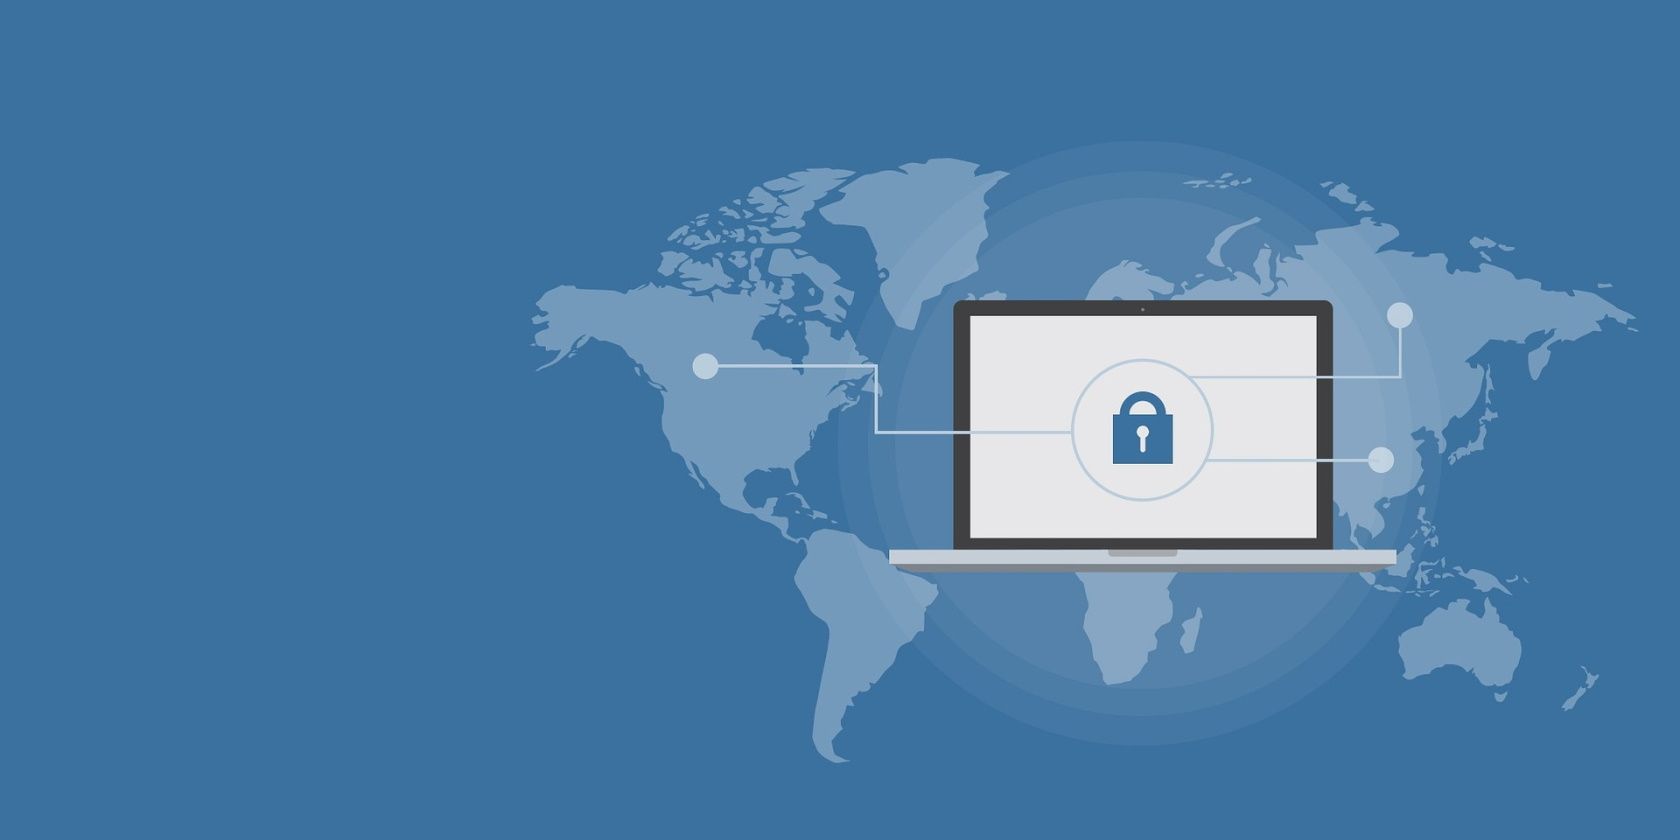 Image of Laptop with a Padlock on Screen in Blue World Map Background